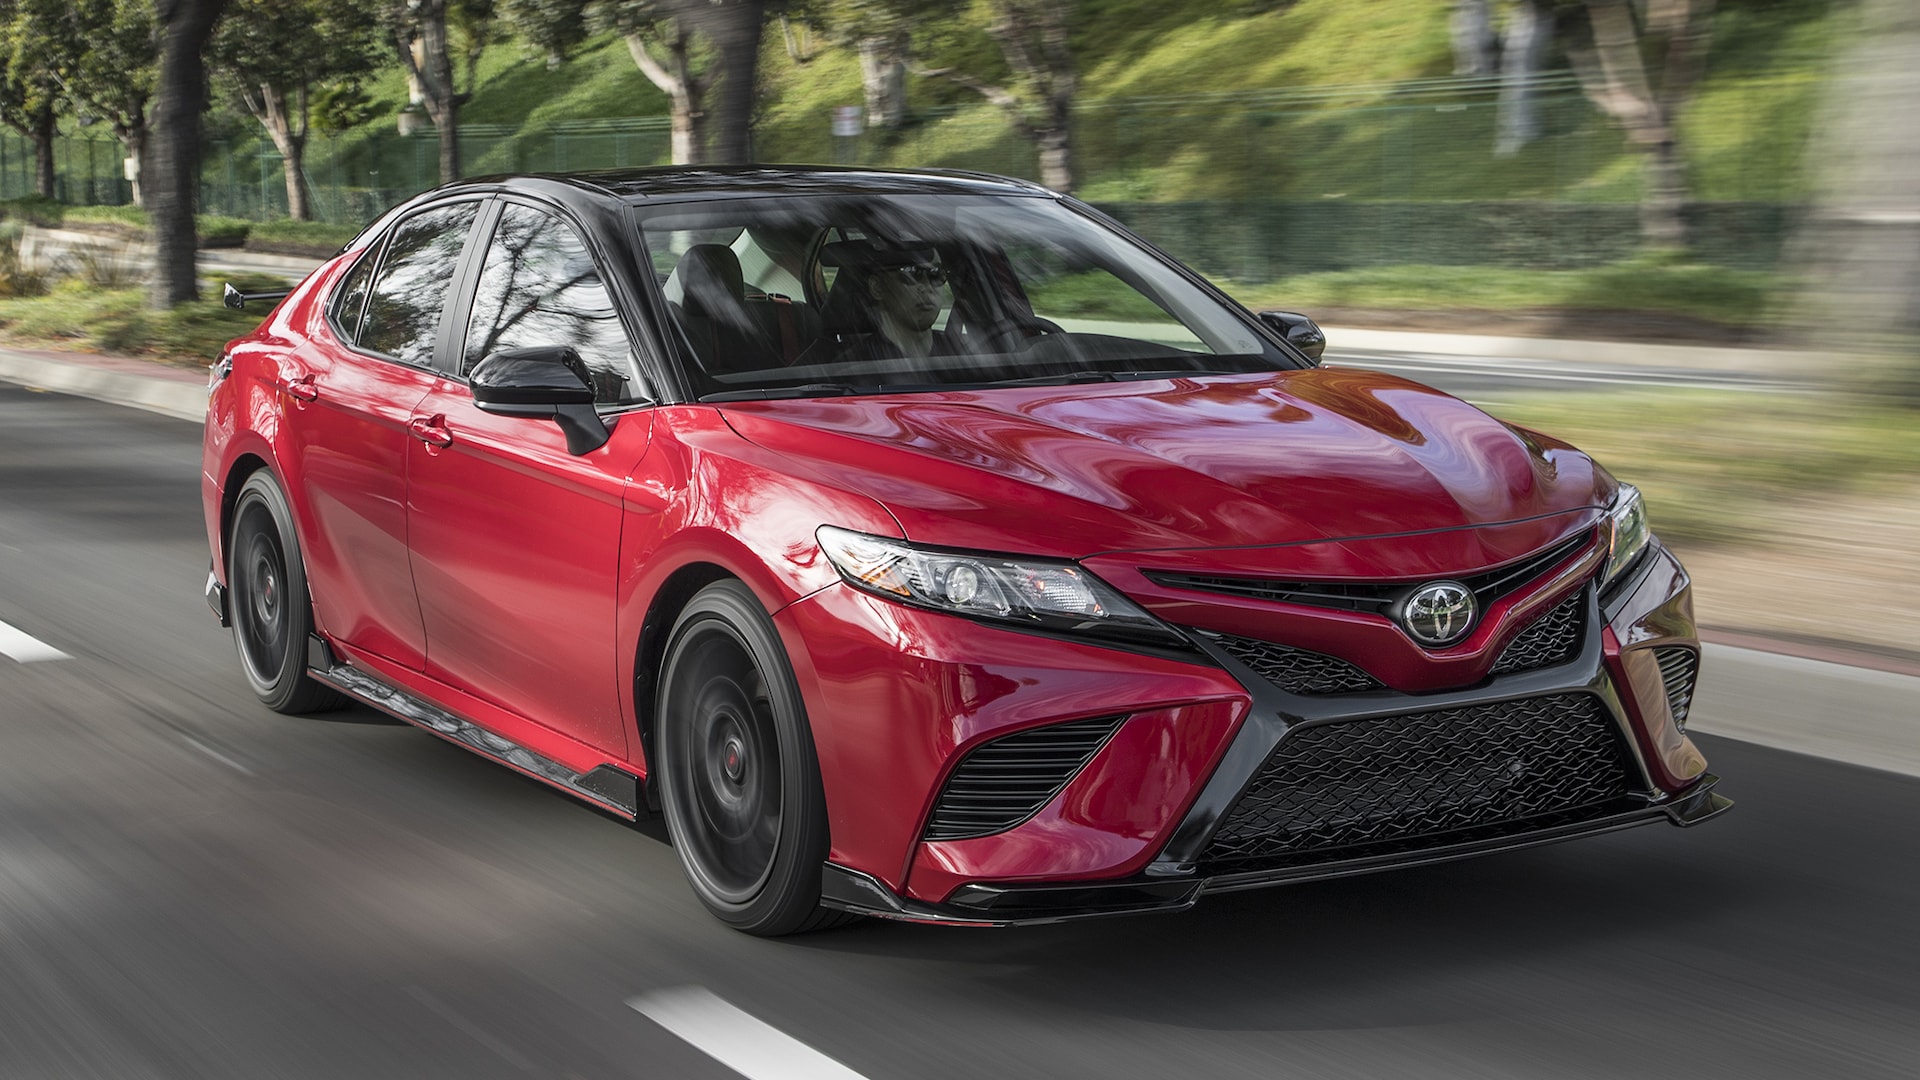 2020 Toyota Camry TRD First Test: A Good Use of the TRD Name?